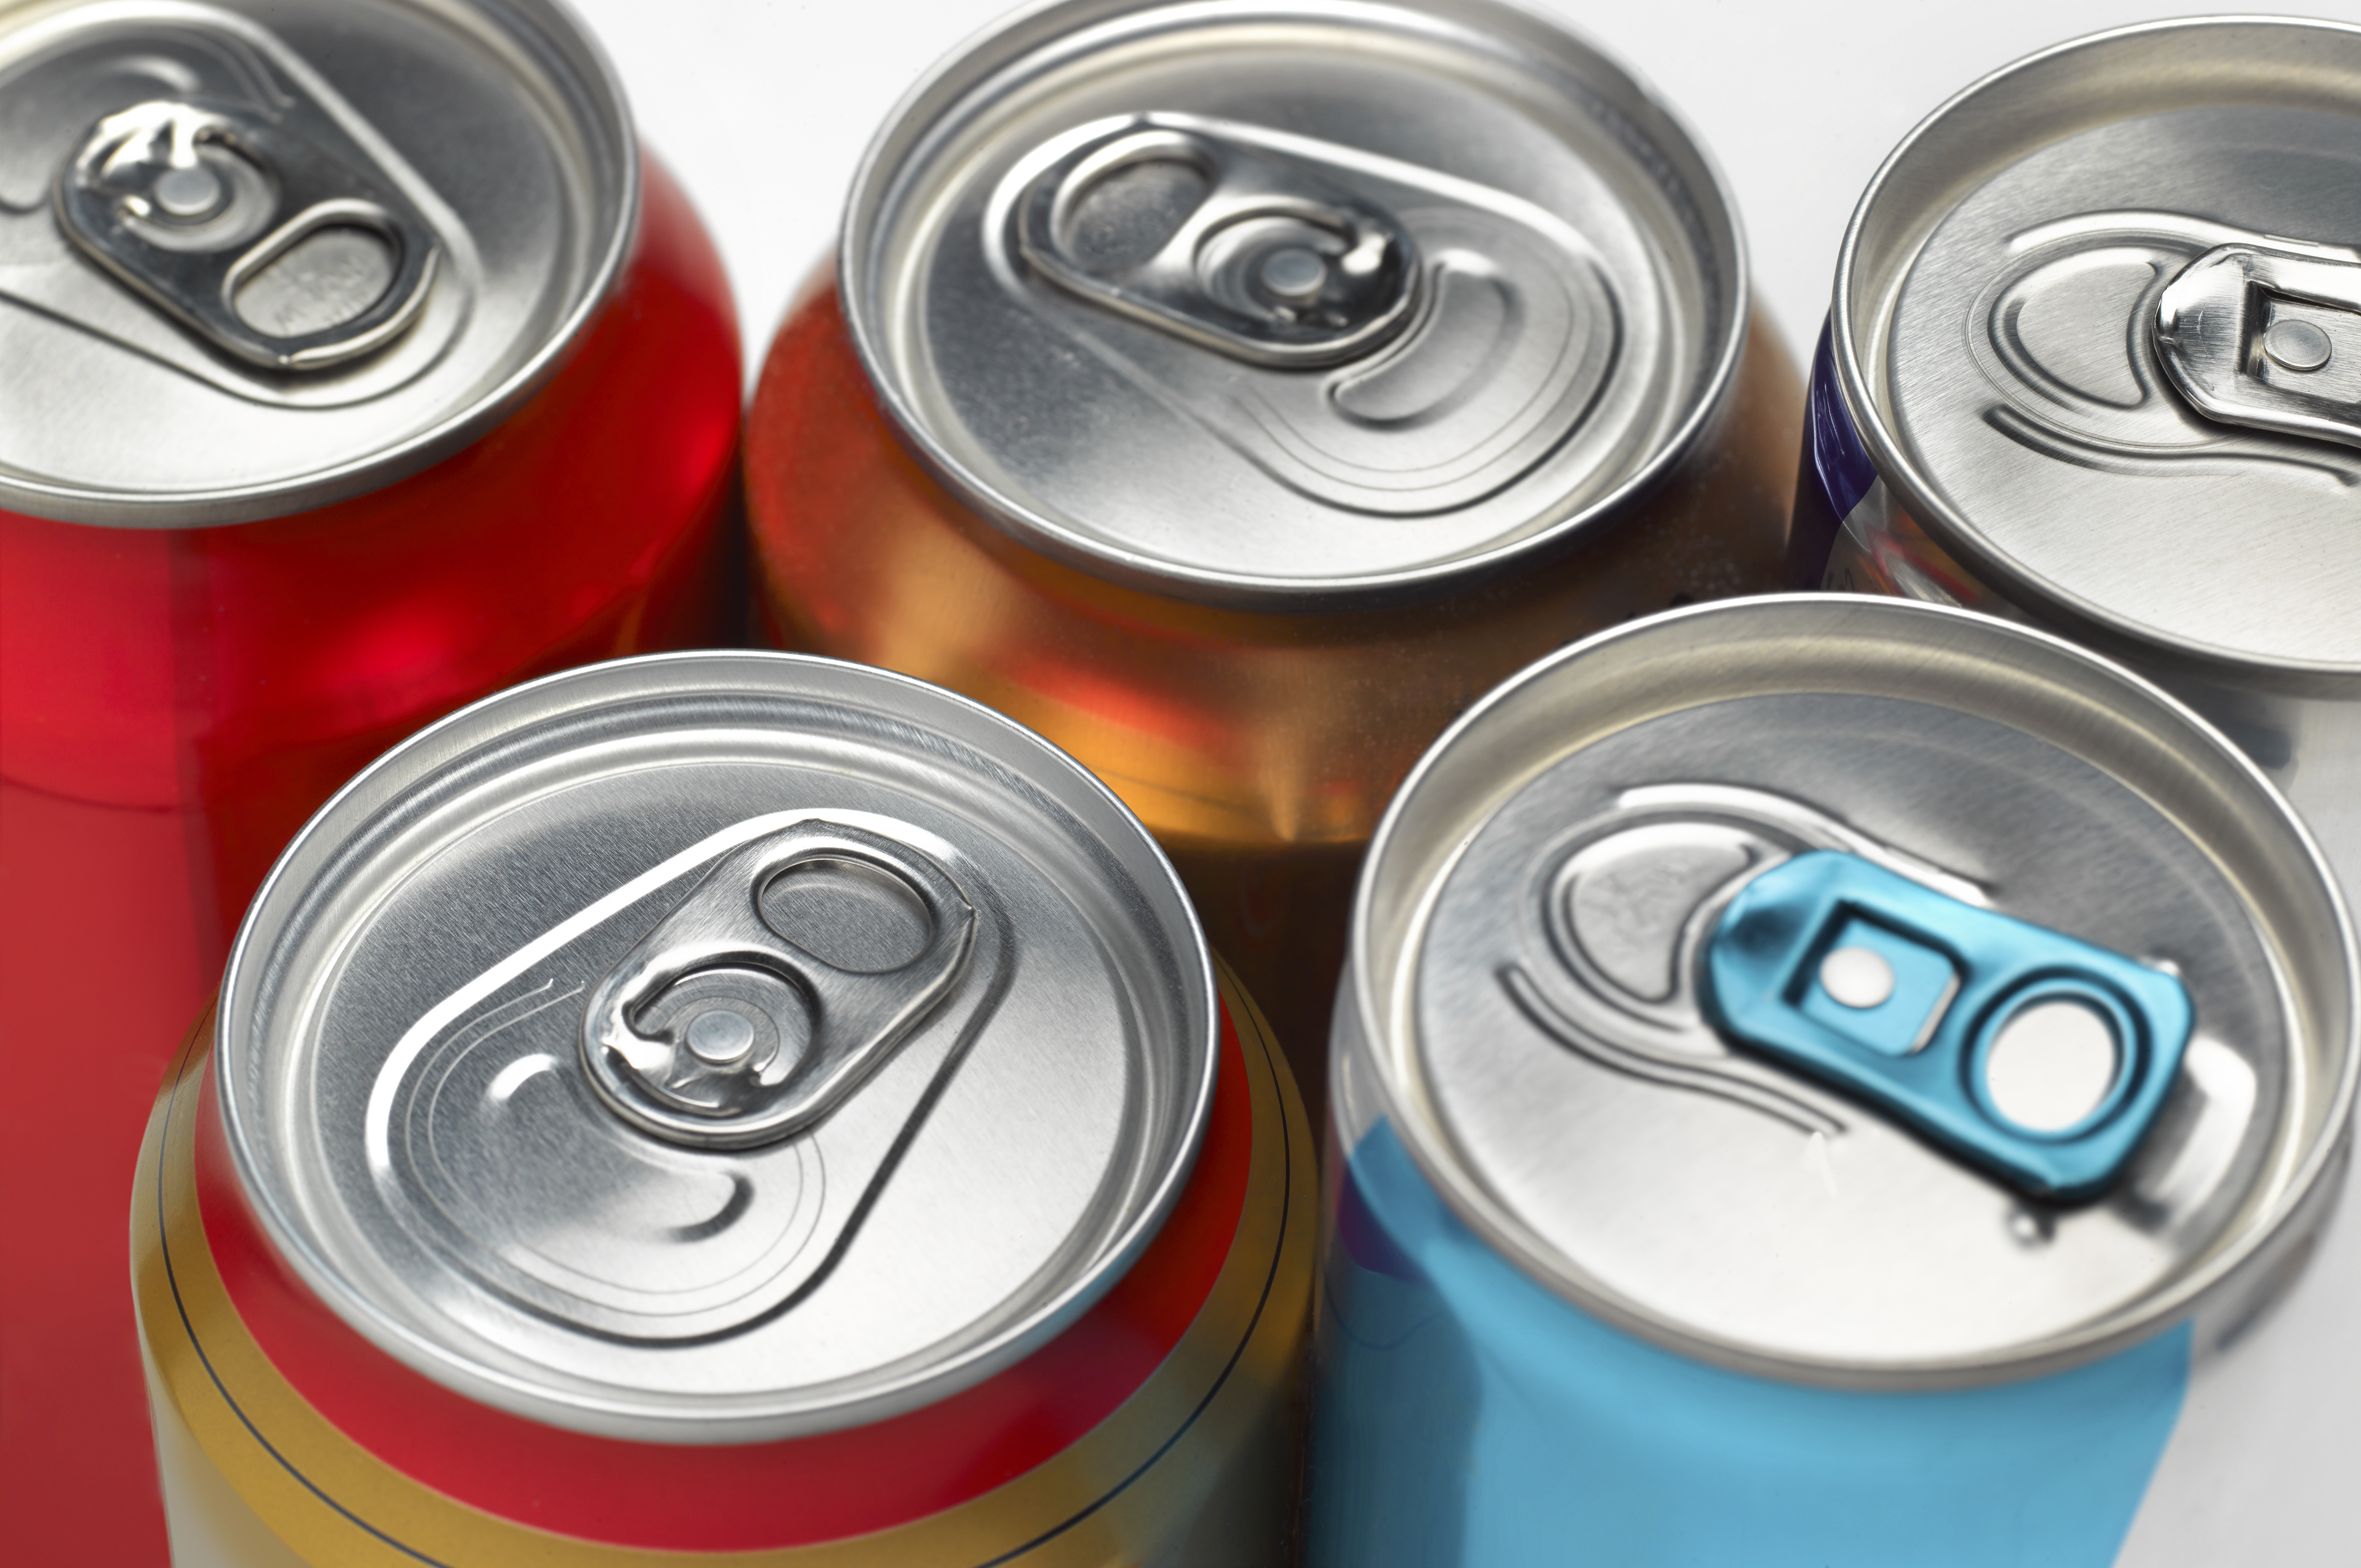 Energy drinks are often criticised for contributing to obesity and health issues